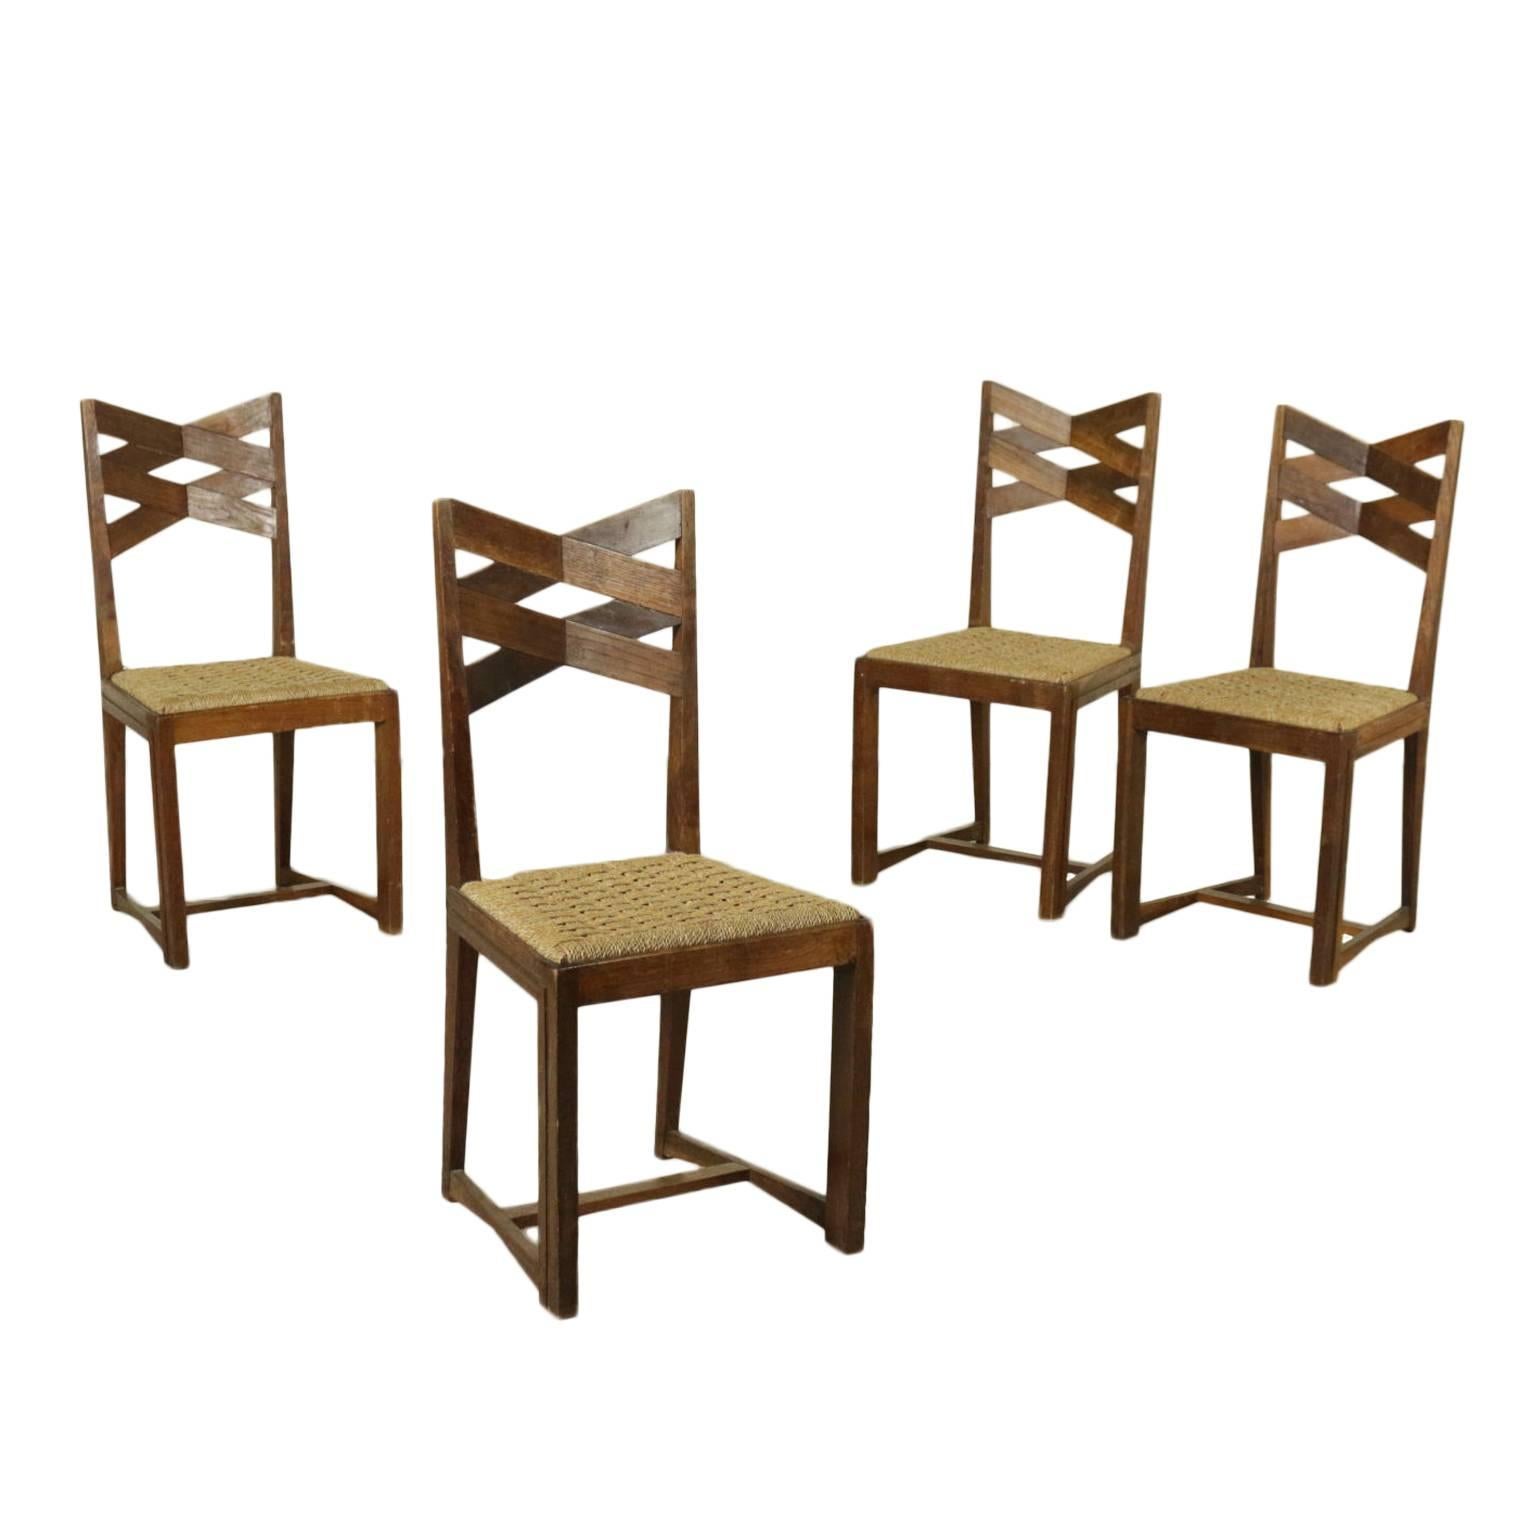 Group of Four Chairs Oak Vintage Manufactured in Italy 1940s